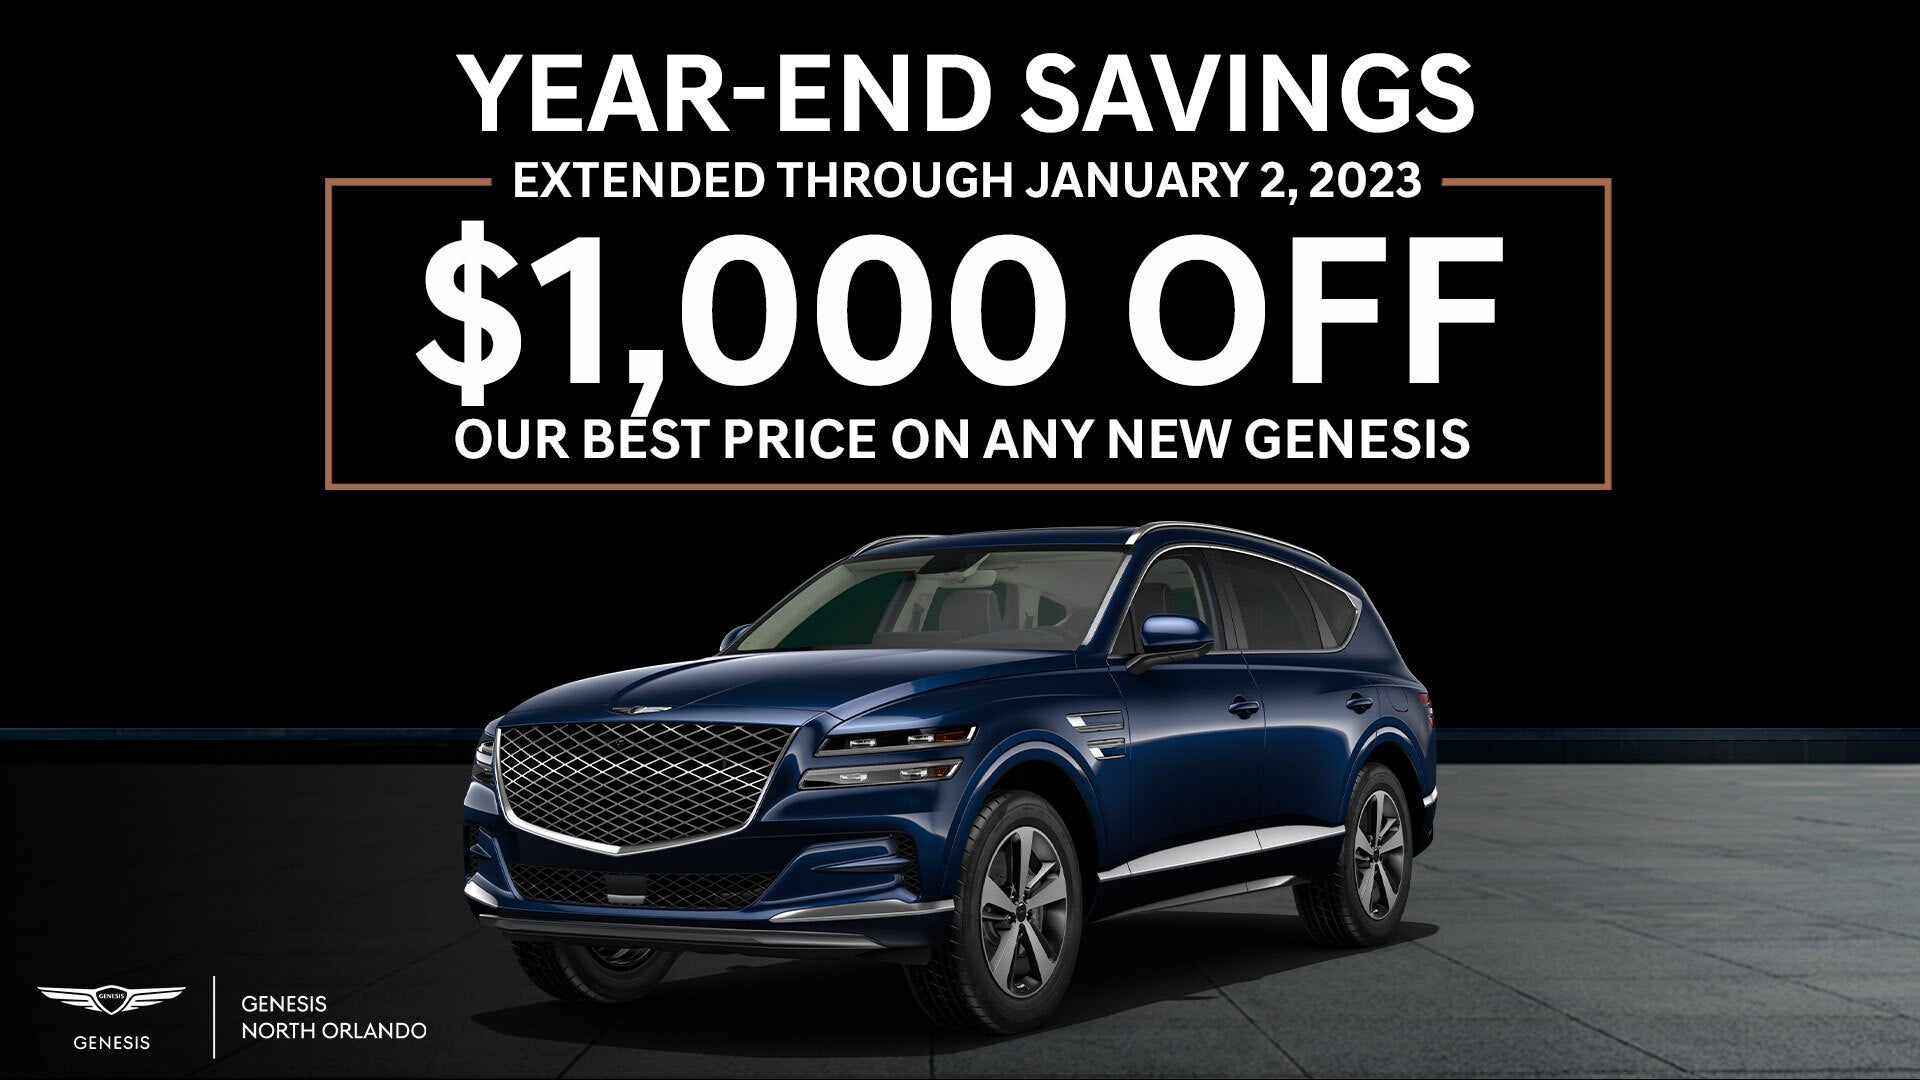 January 2nd only, $1,000 off Our Best Price on any new Genesis